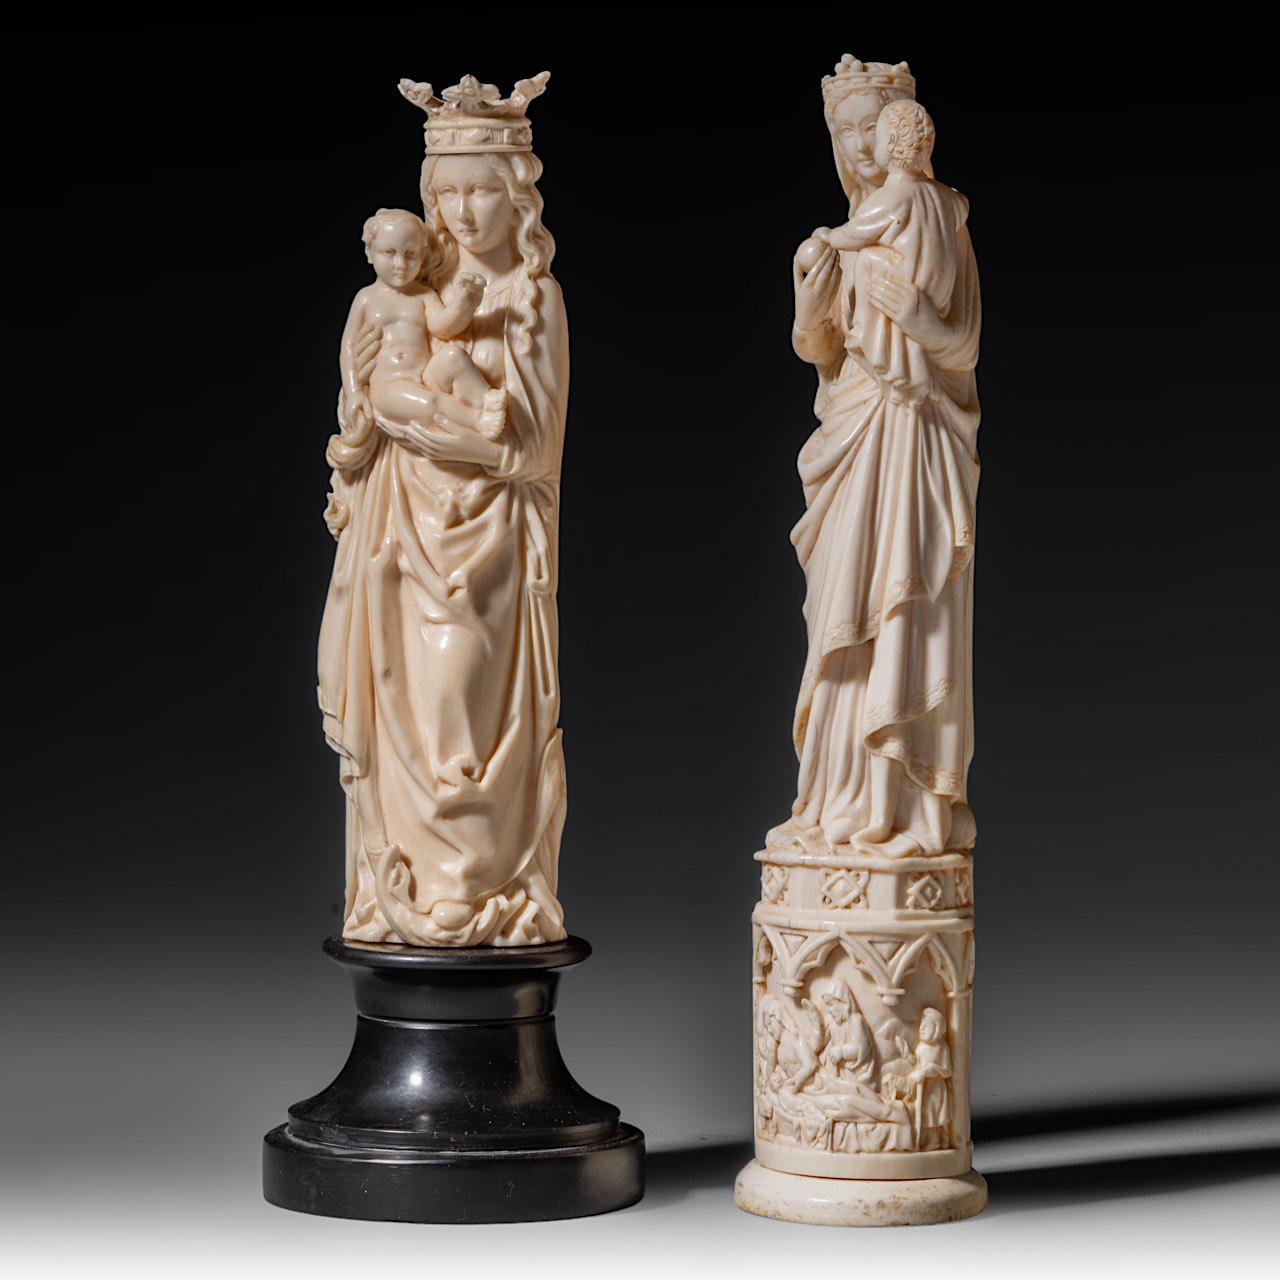 Two 19th/20th century Dieppe ivory Holy Virgin and Child statues (+) - Image 2 of 6